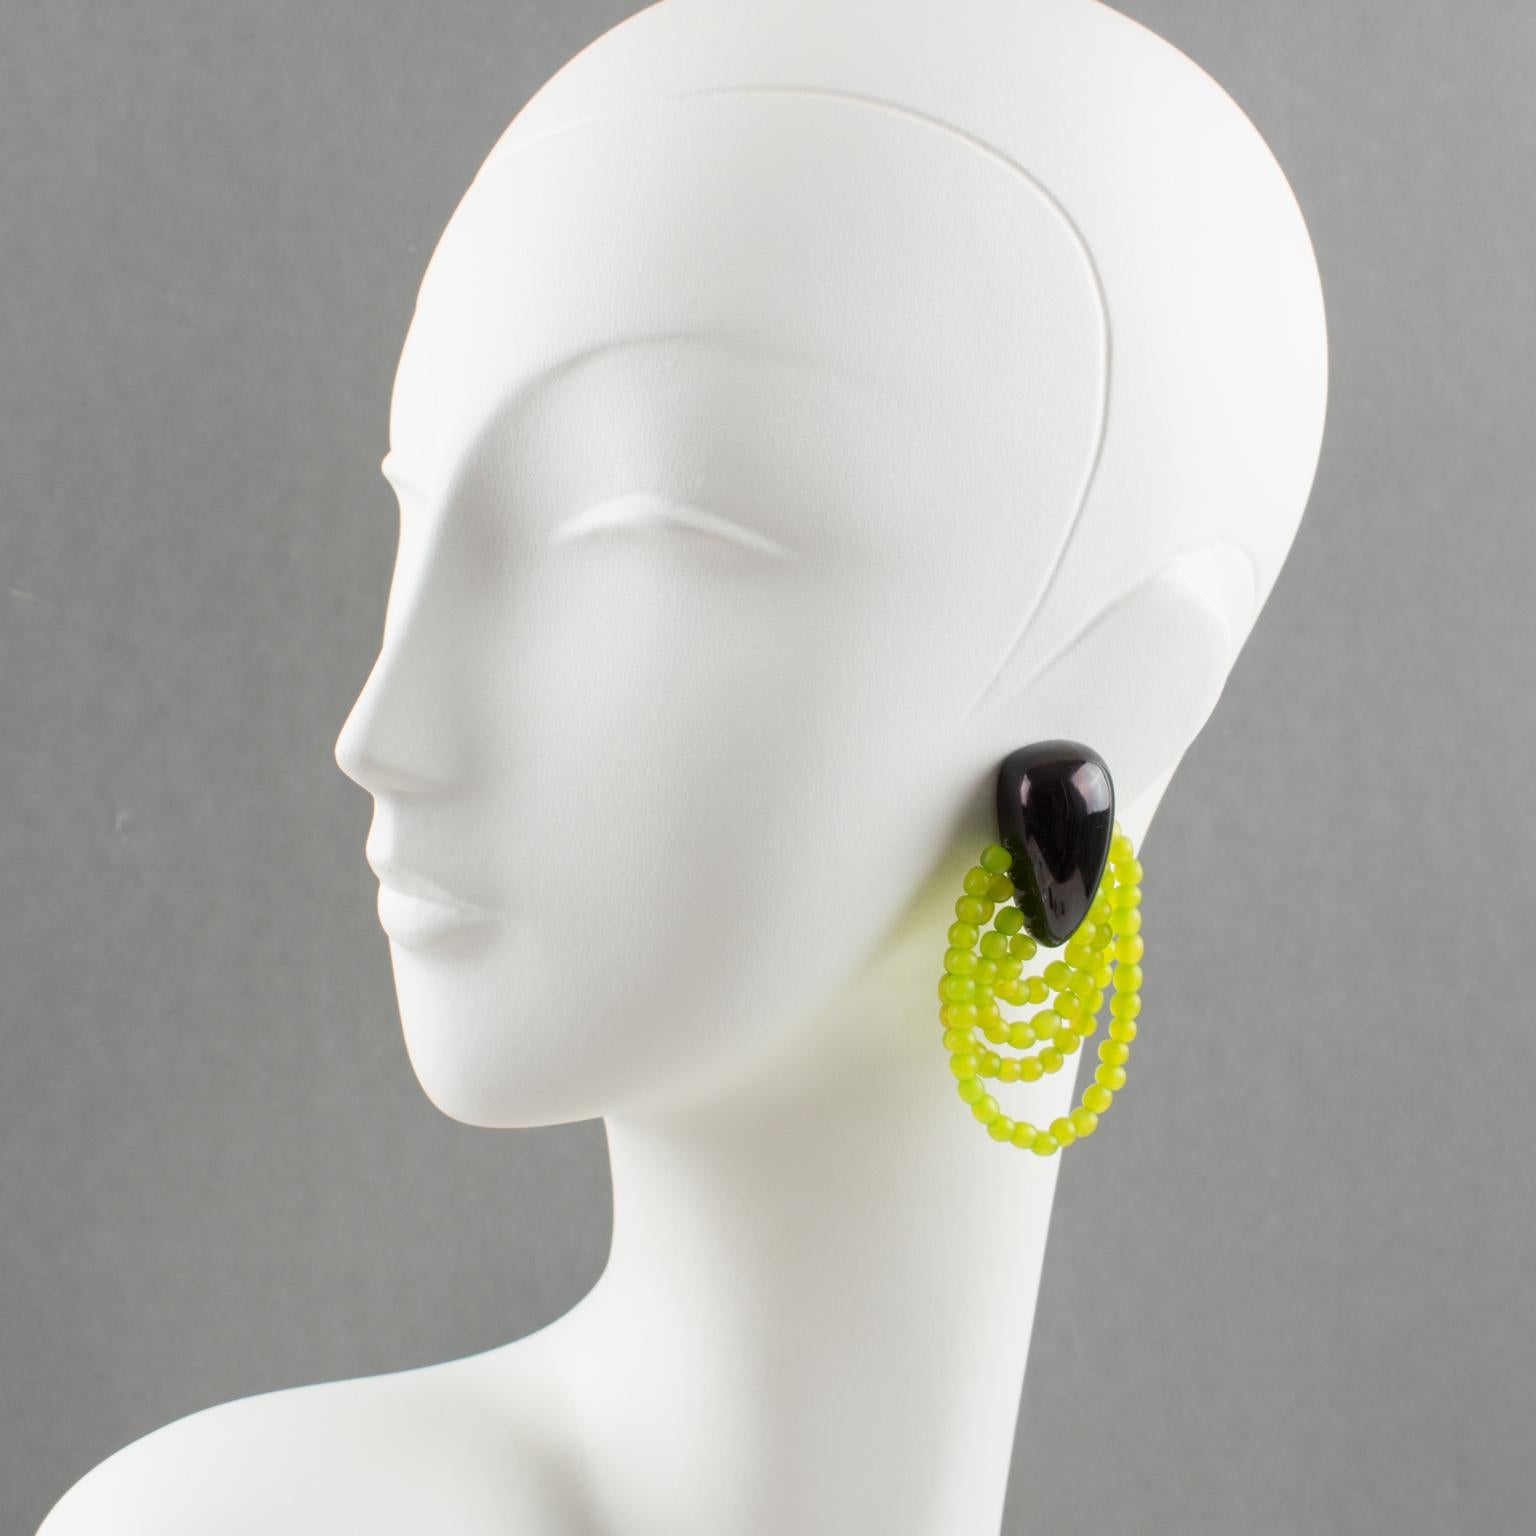 Elegant oversized clip-on earrings by Gerda Lyngaard for Monies. These earrings feature smooth hand-carved resin carved and treated to resemble faux horn material in a modified teardrop shape. They have four graduated loops of frosted green